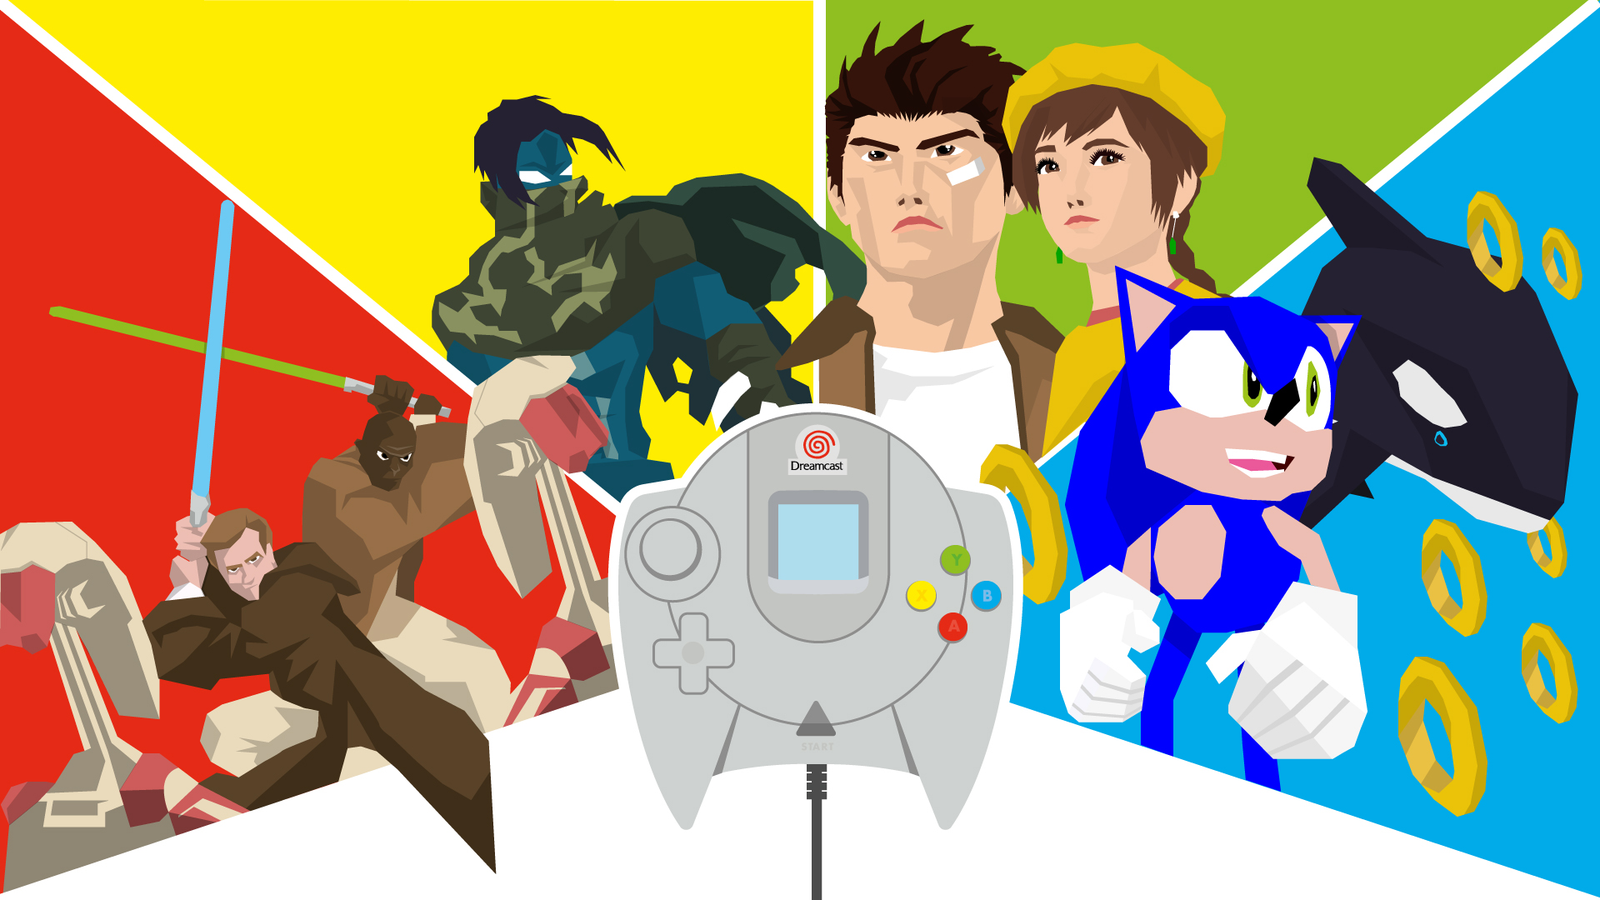 https://assetsio.gnwcdn.com/Dreamcast-Anniversary_Story-Art2.jpg?width=1600&height=900&fit=crop&quality=100&format=png&enable=upscale&auto=webp